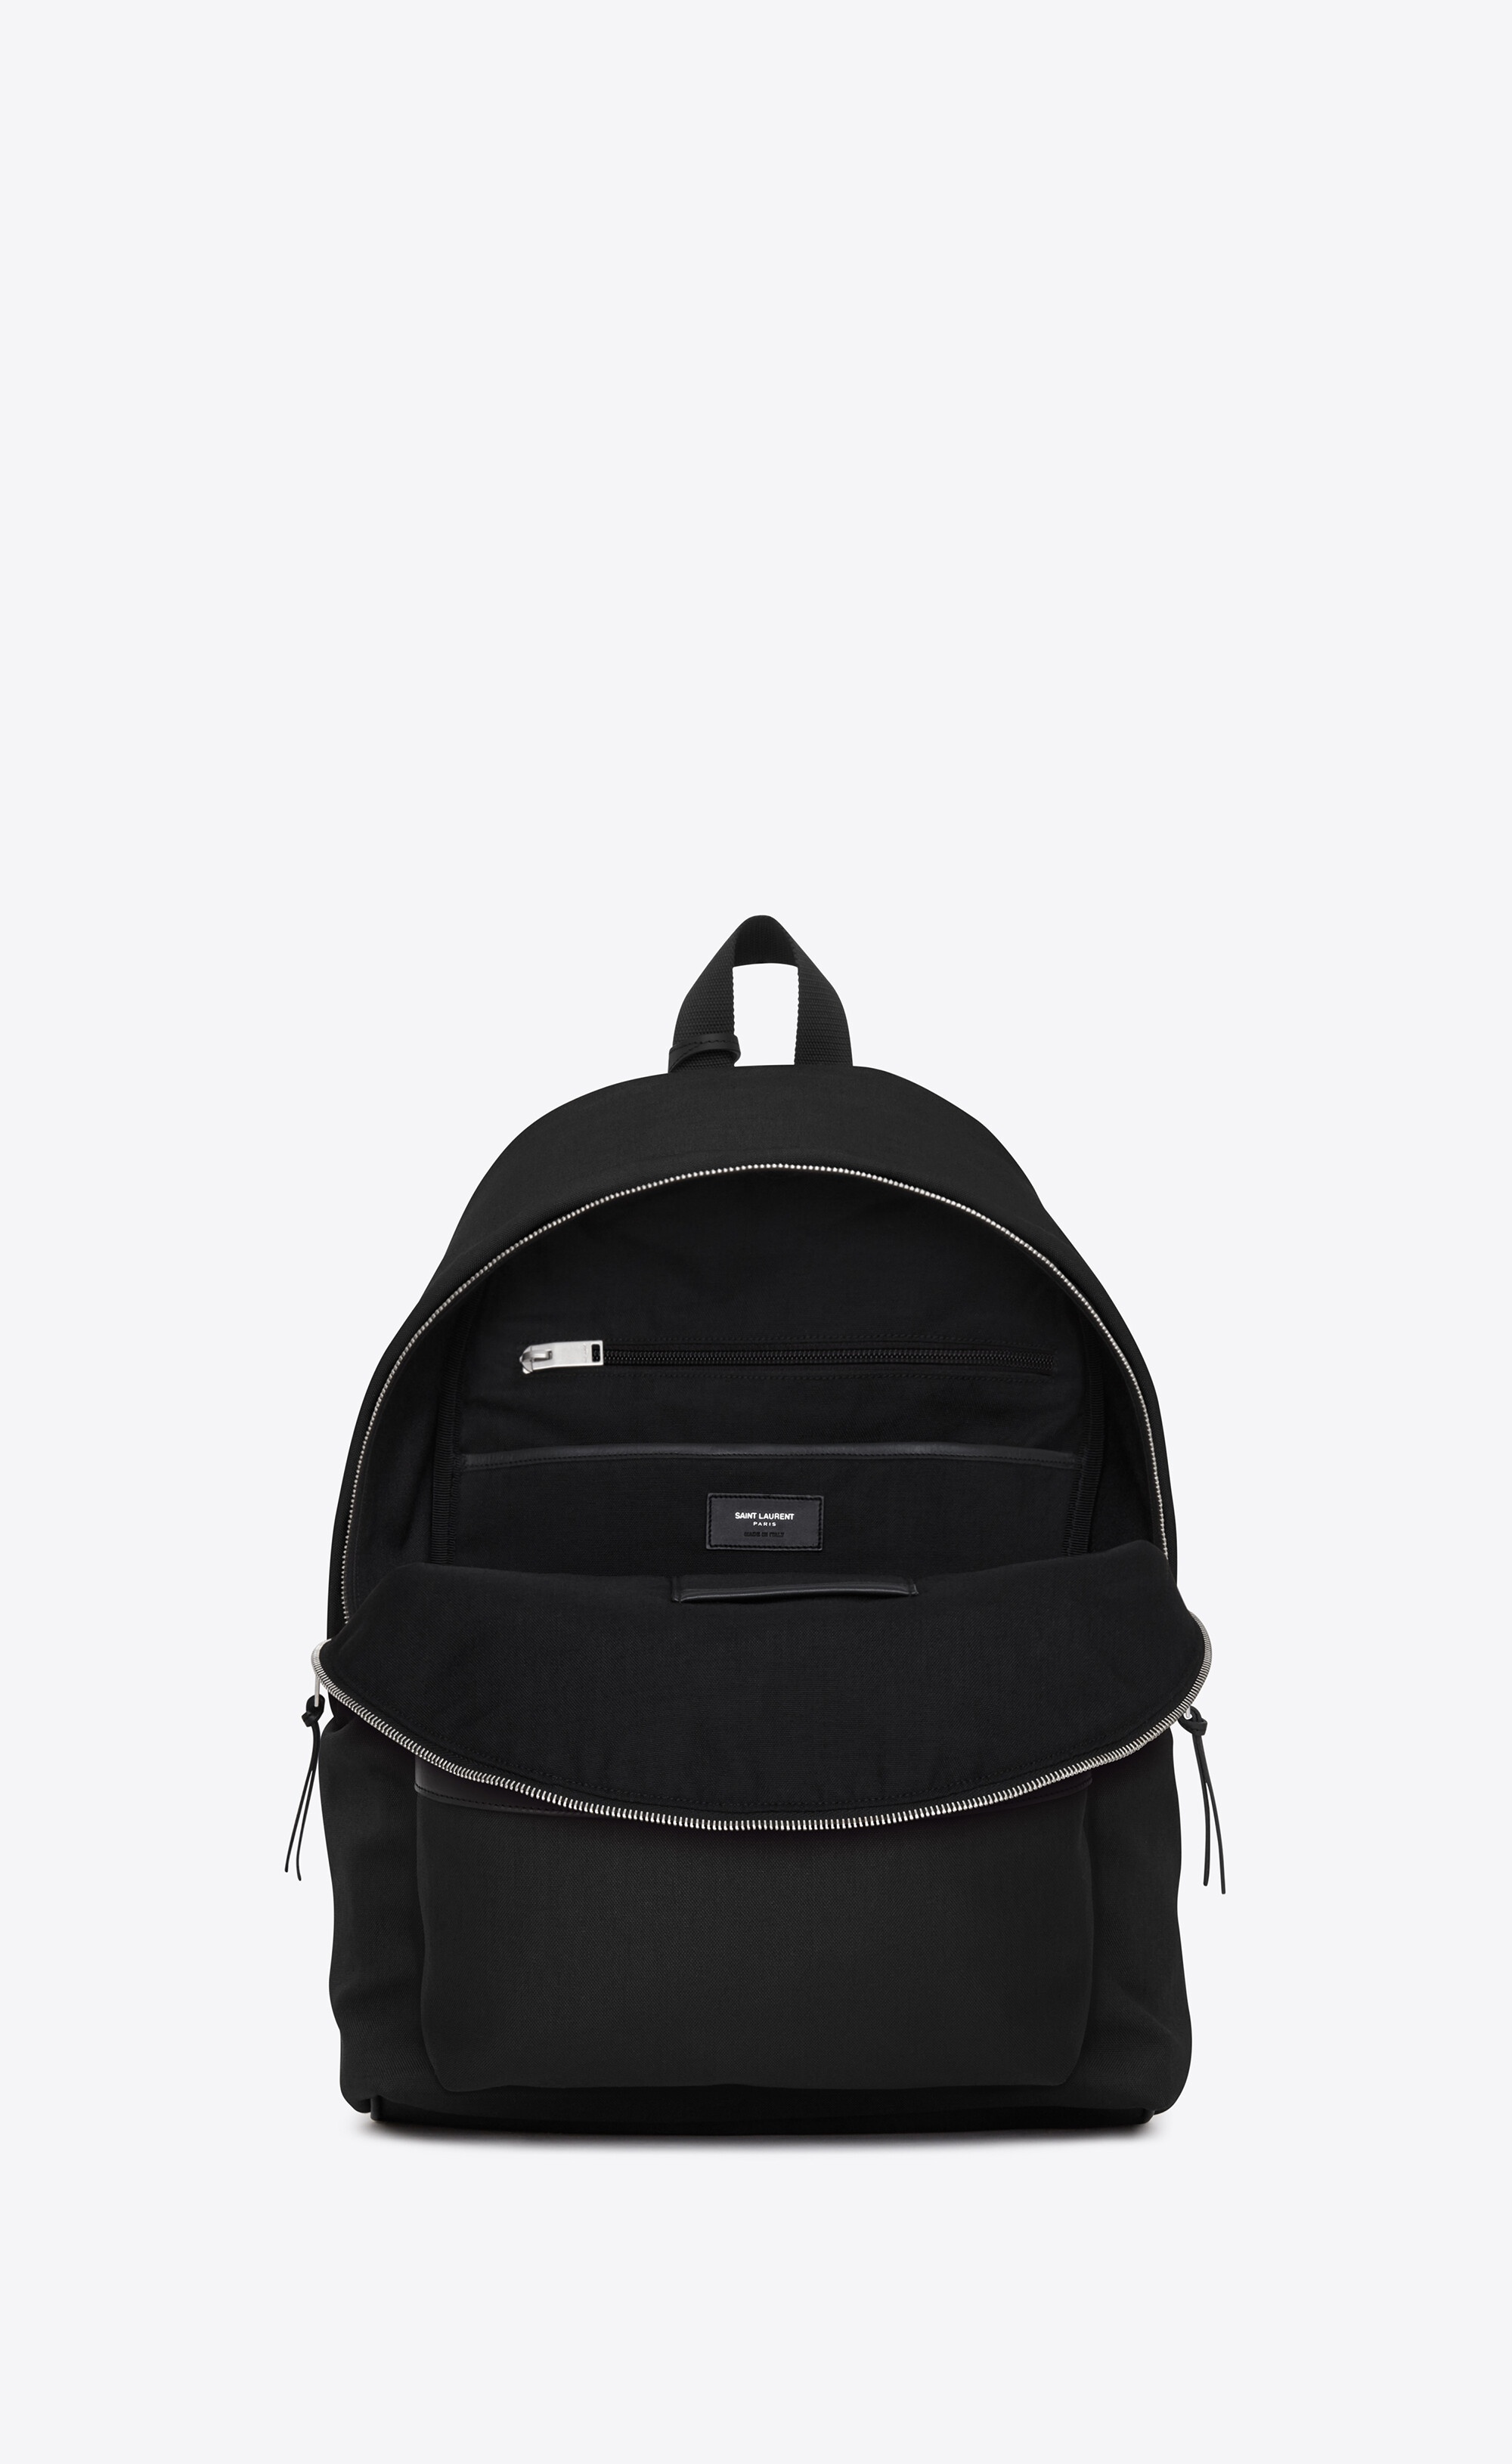 city backpack in canvas, nylon and leather - 4